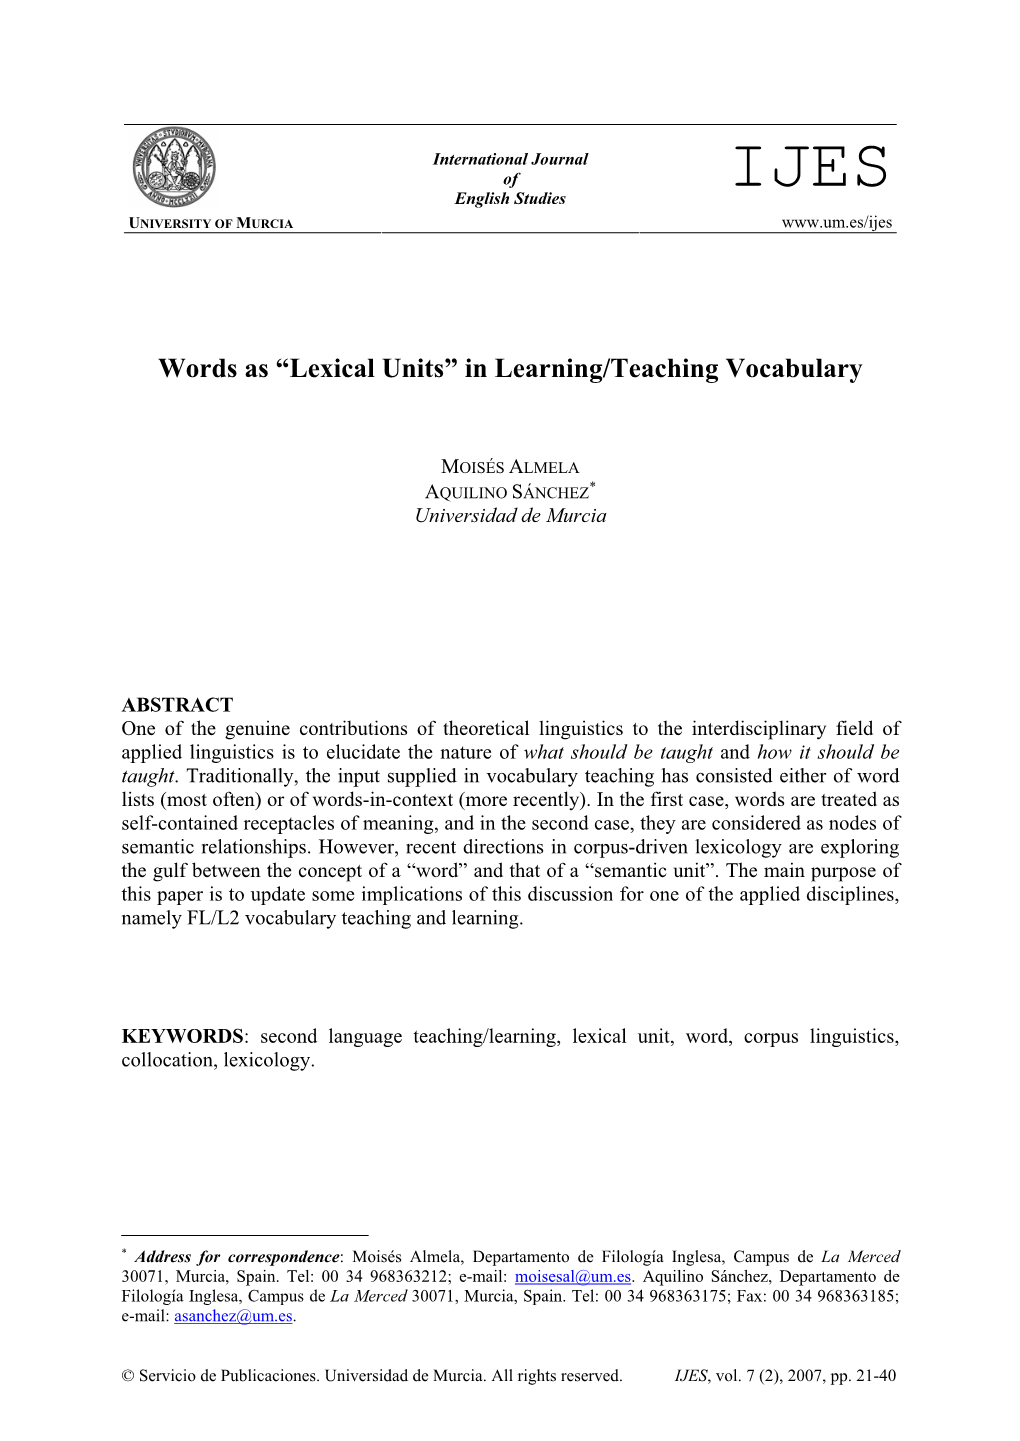 Lexical Units” in Learning/Teaching Vocabulary